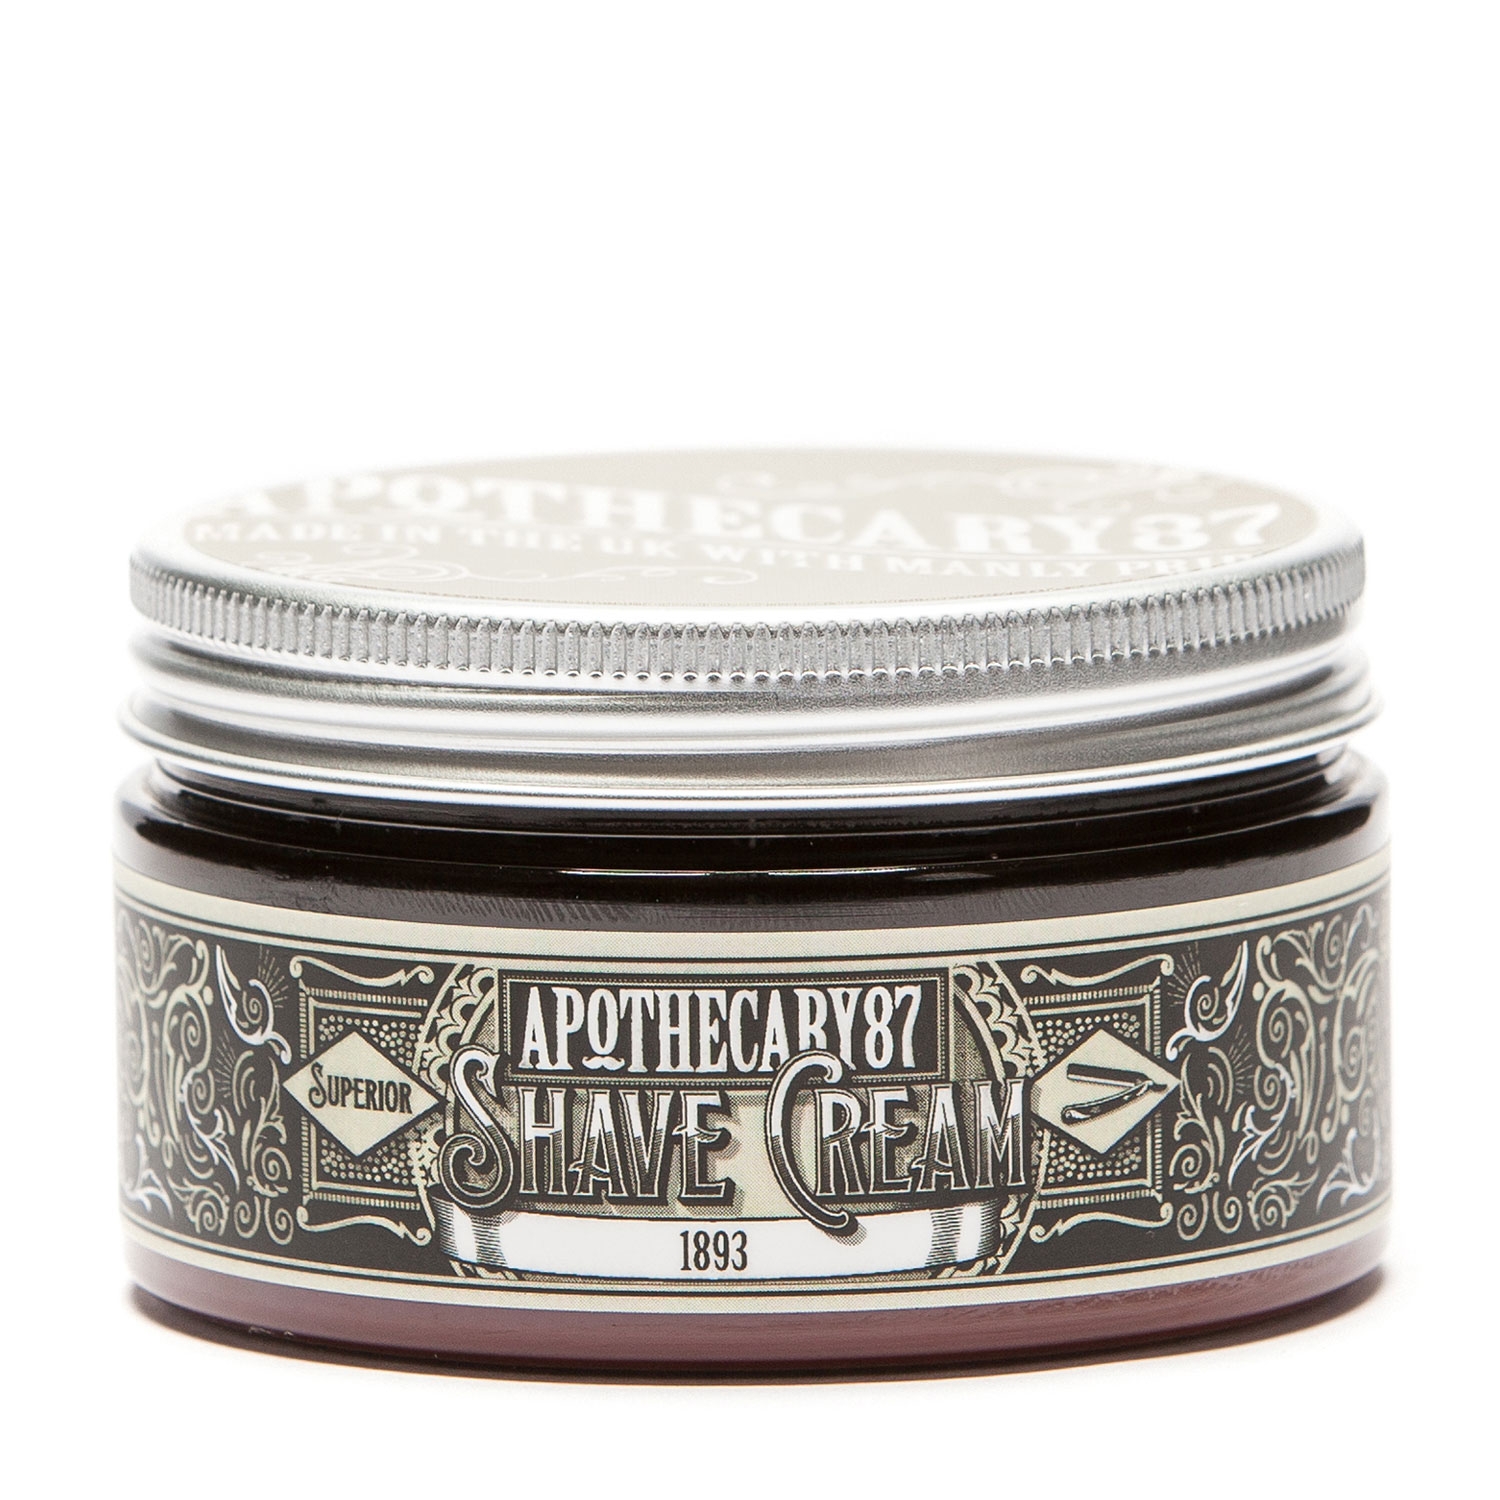 Product image from Apothecary87 Grooming - Shave Cream 1893 Fragrance